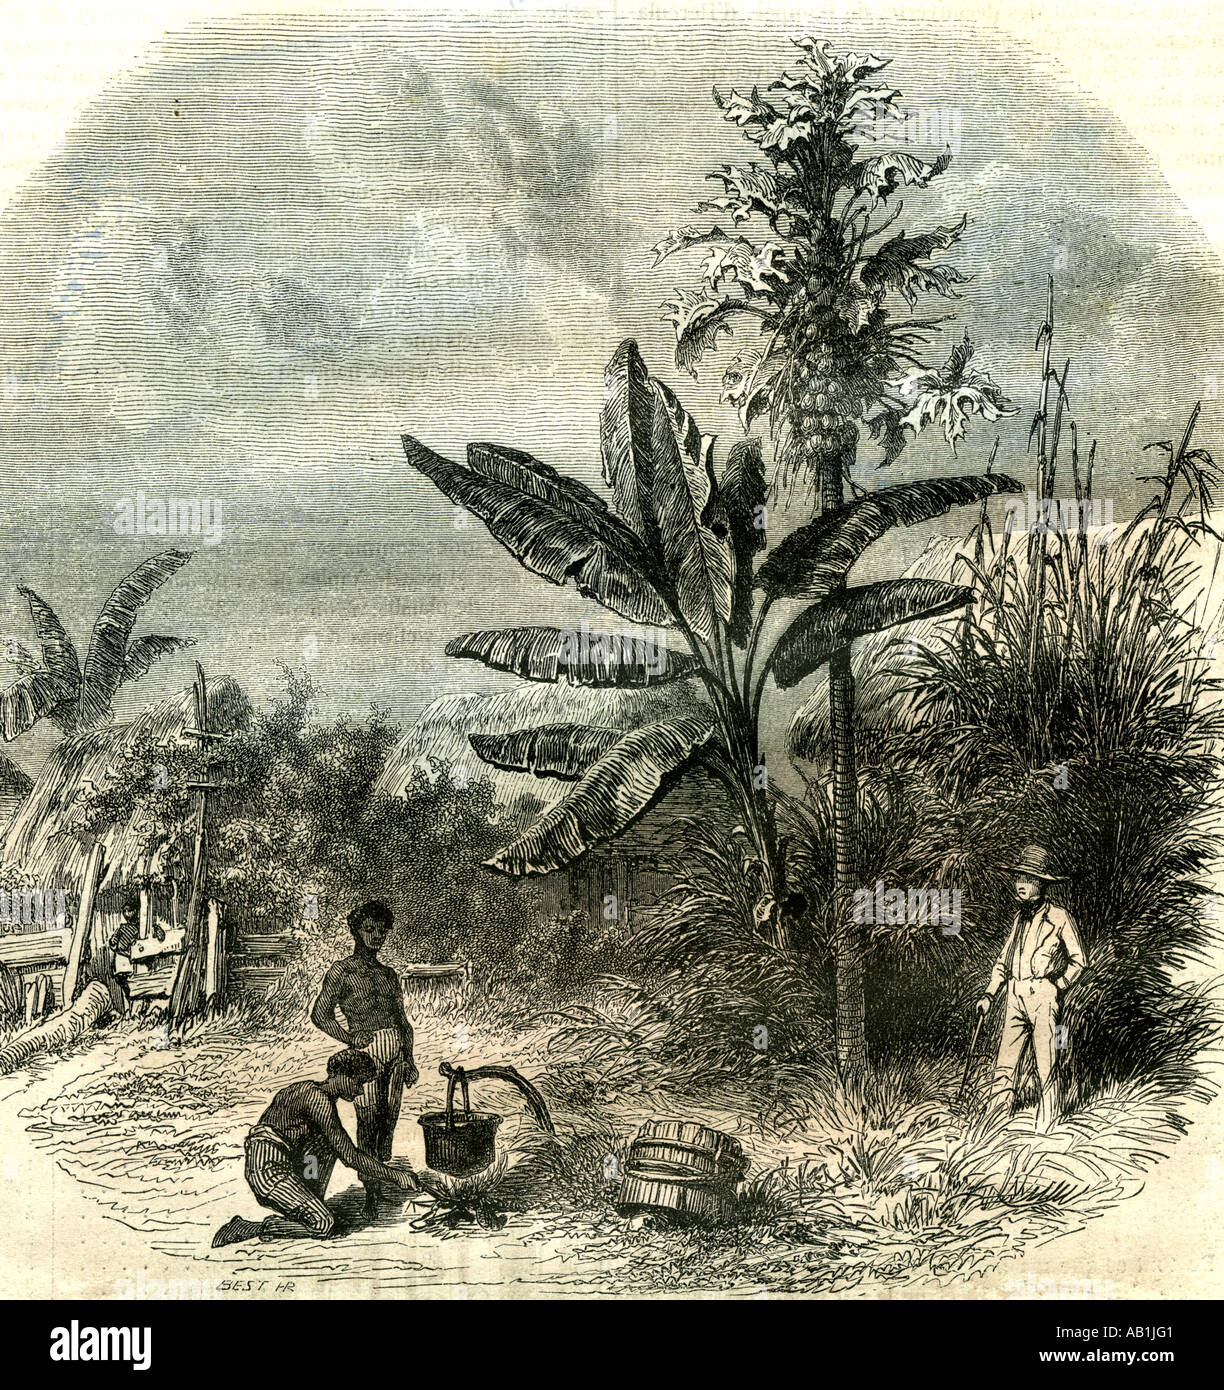 Guadeloupe France 19th century Stock Photo